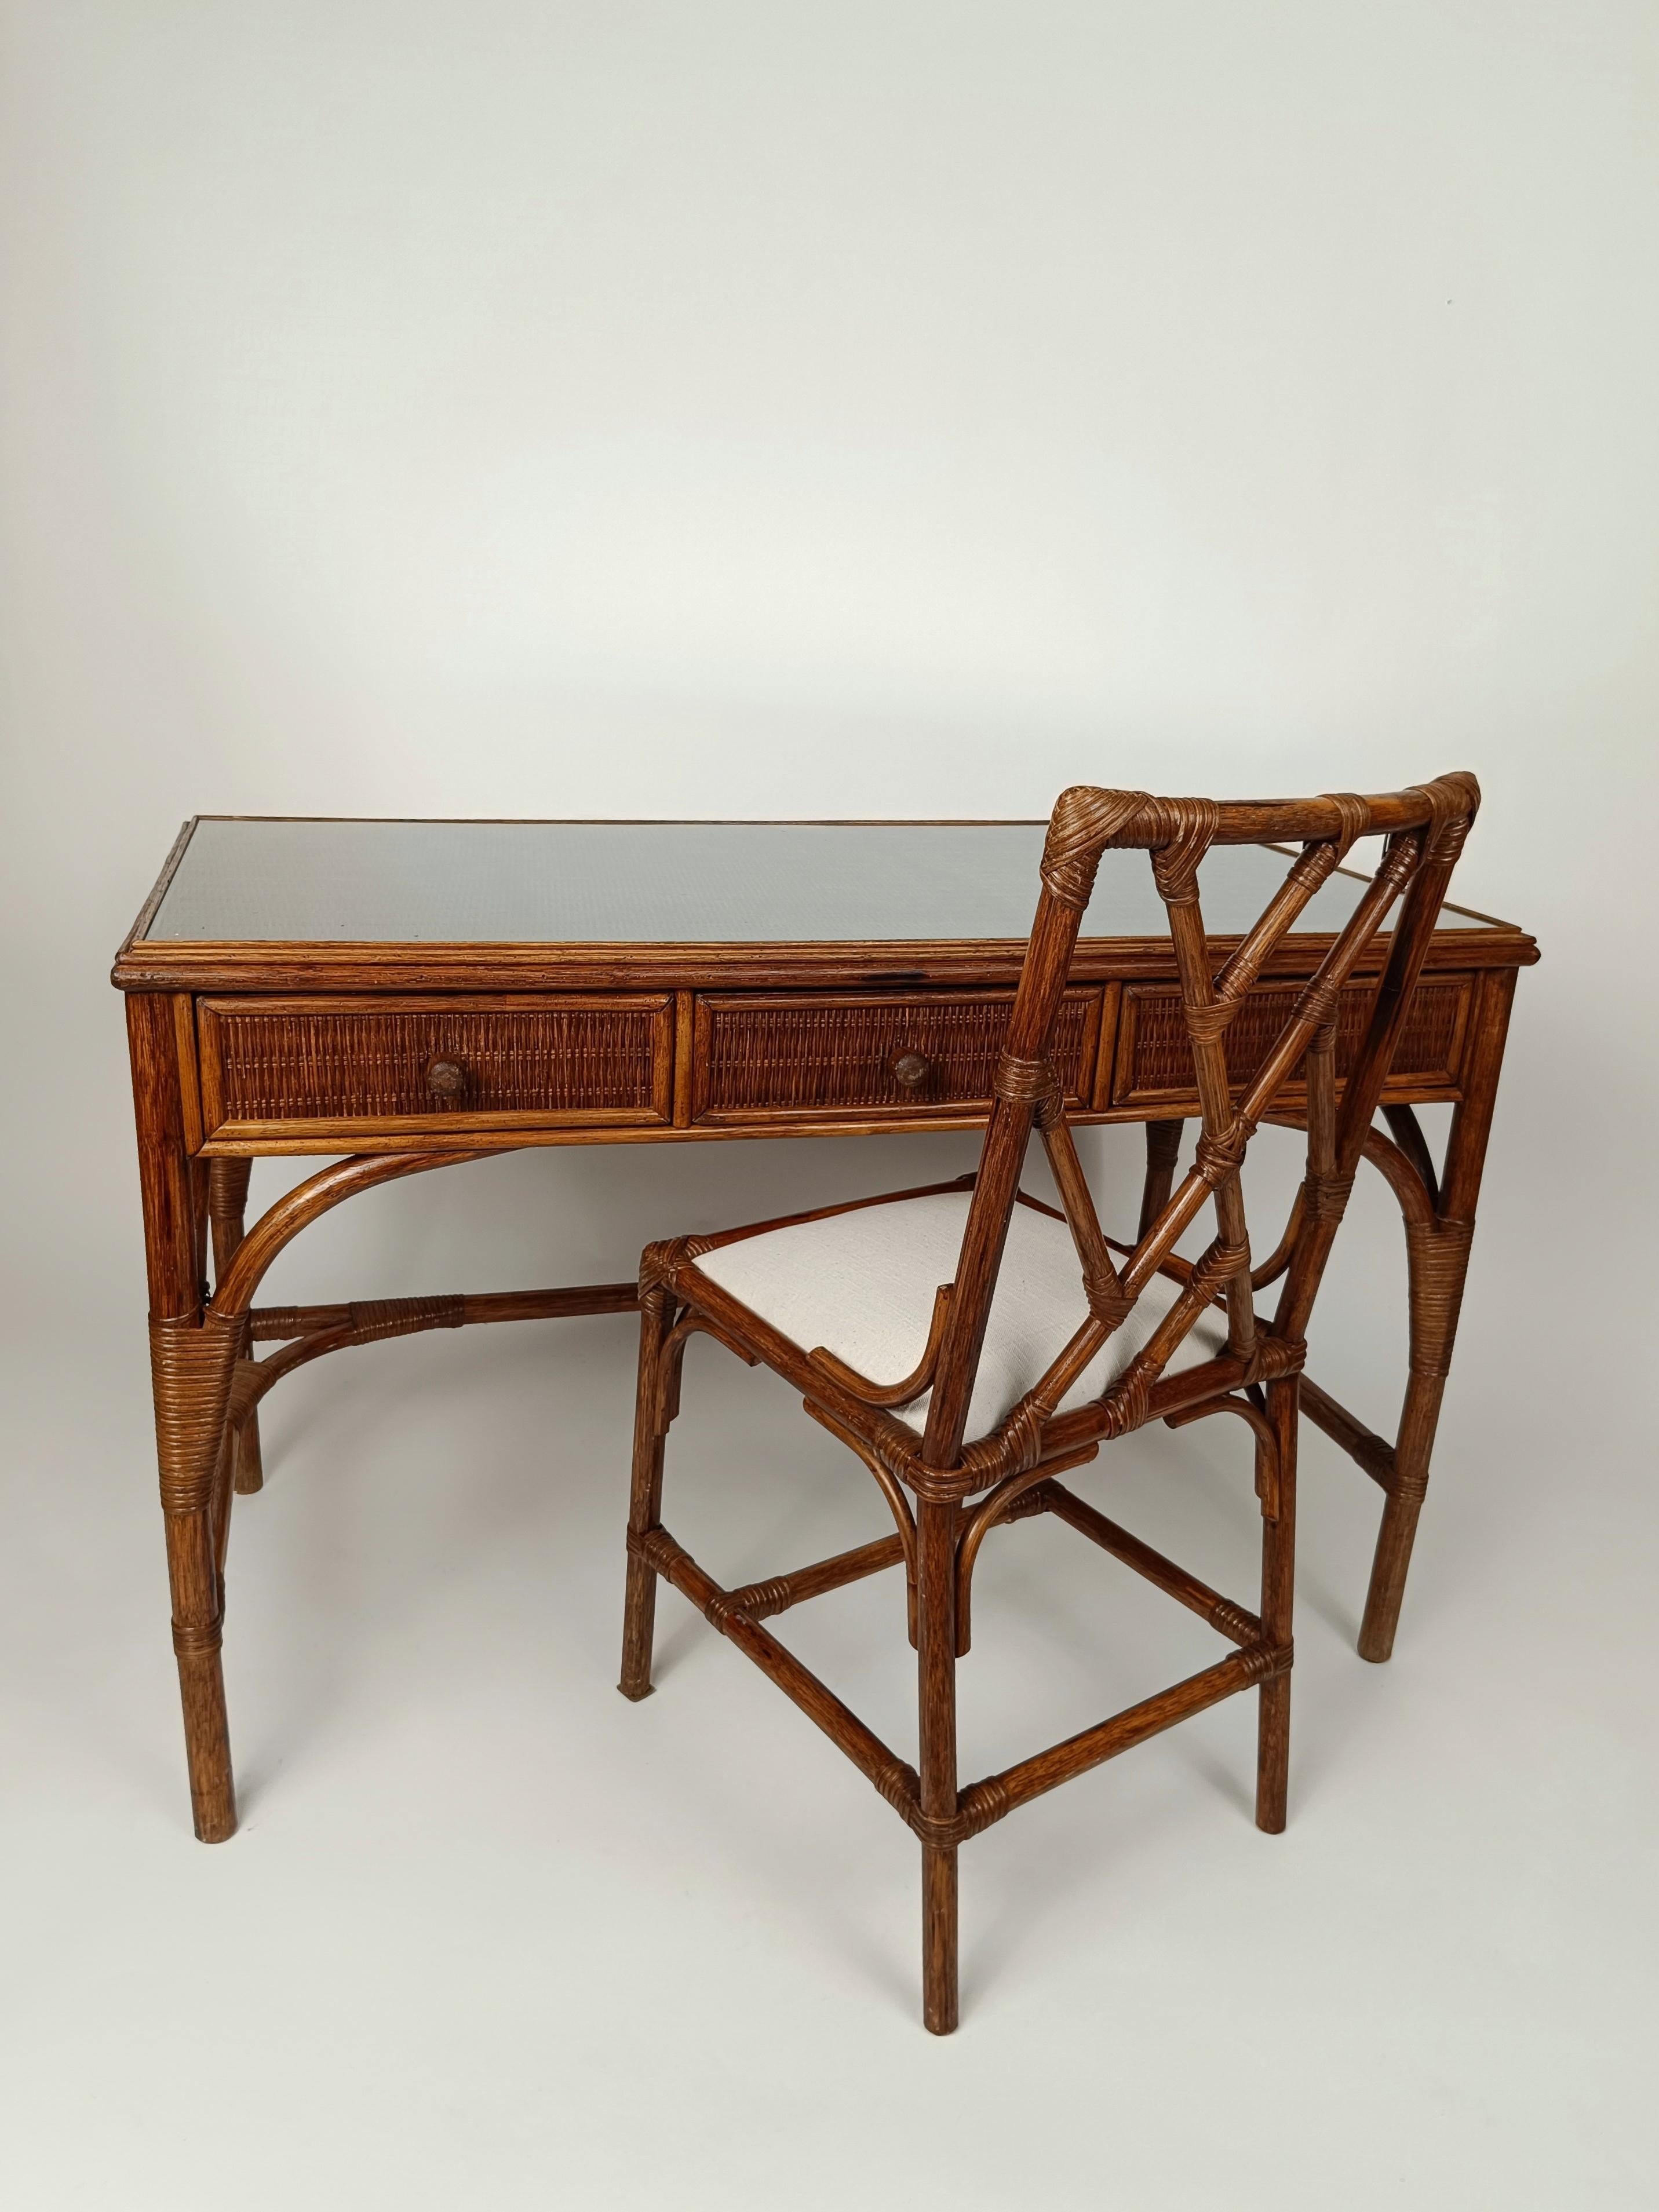 Midcentury Italian Writing Desk with Drawers and Chair, in Bamboo Cane & Wicker For Sale 7